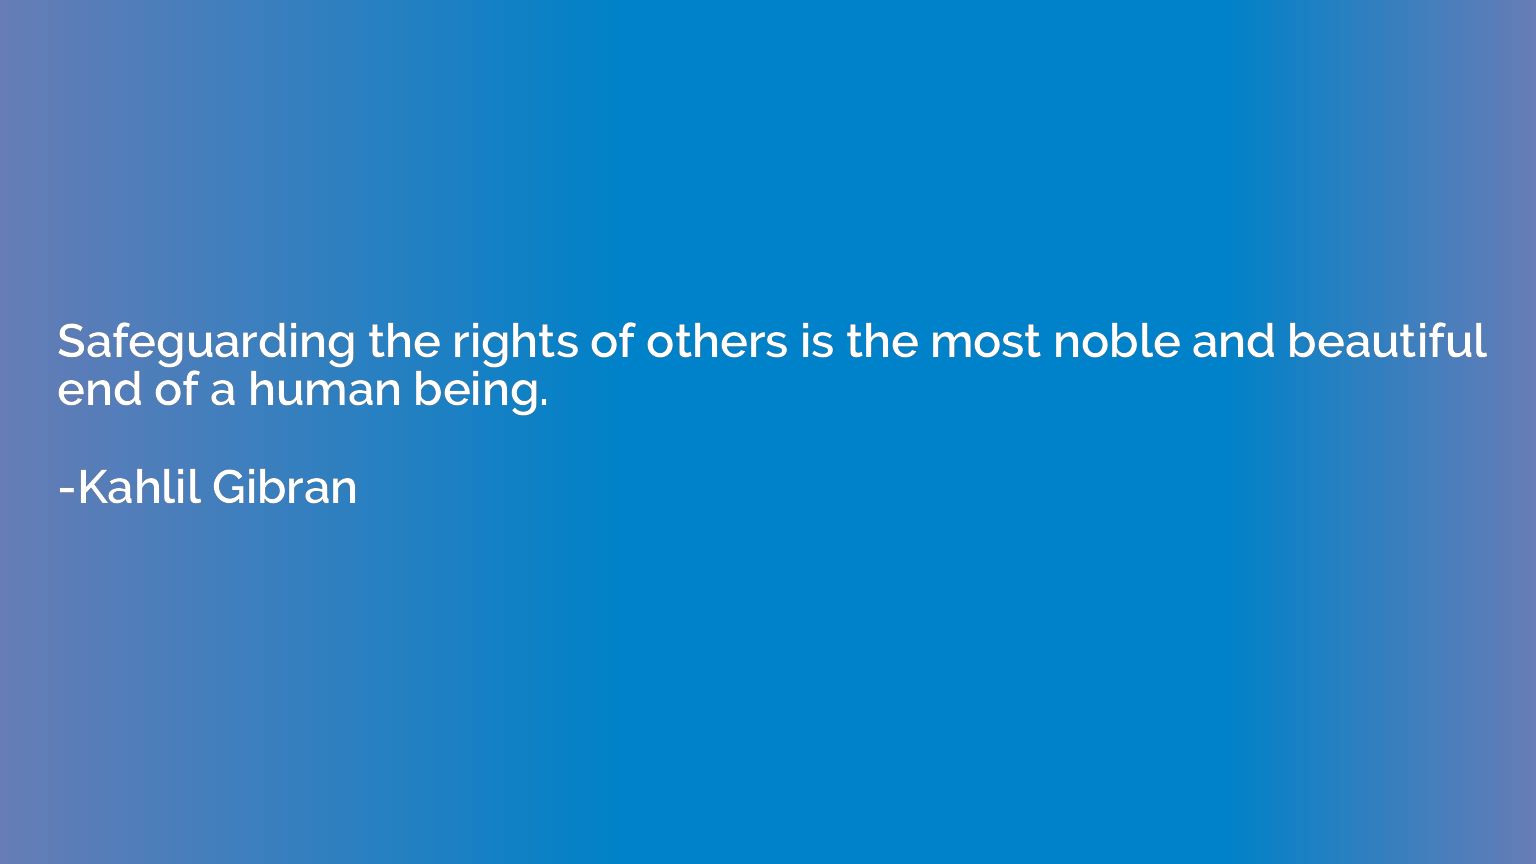 Safeguarding the rights of others is the most noble and beau